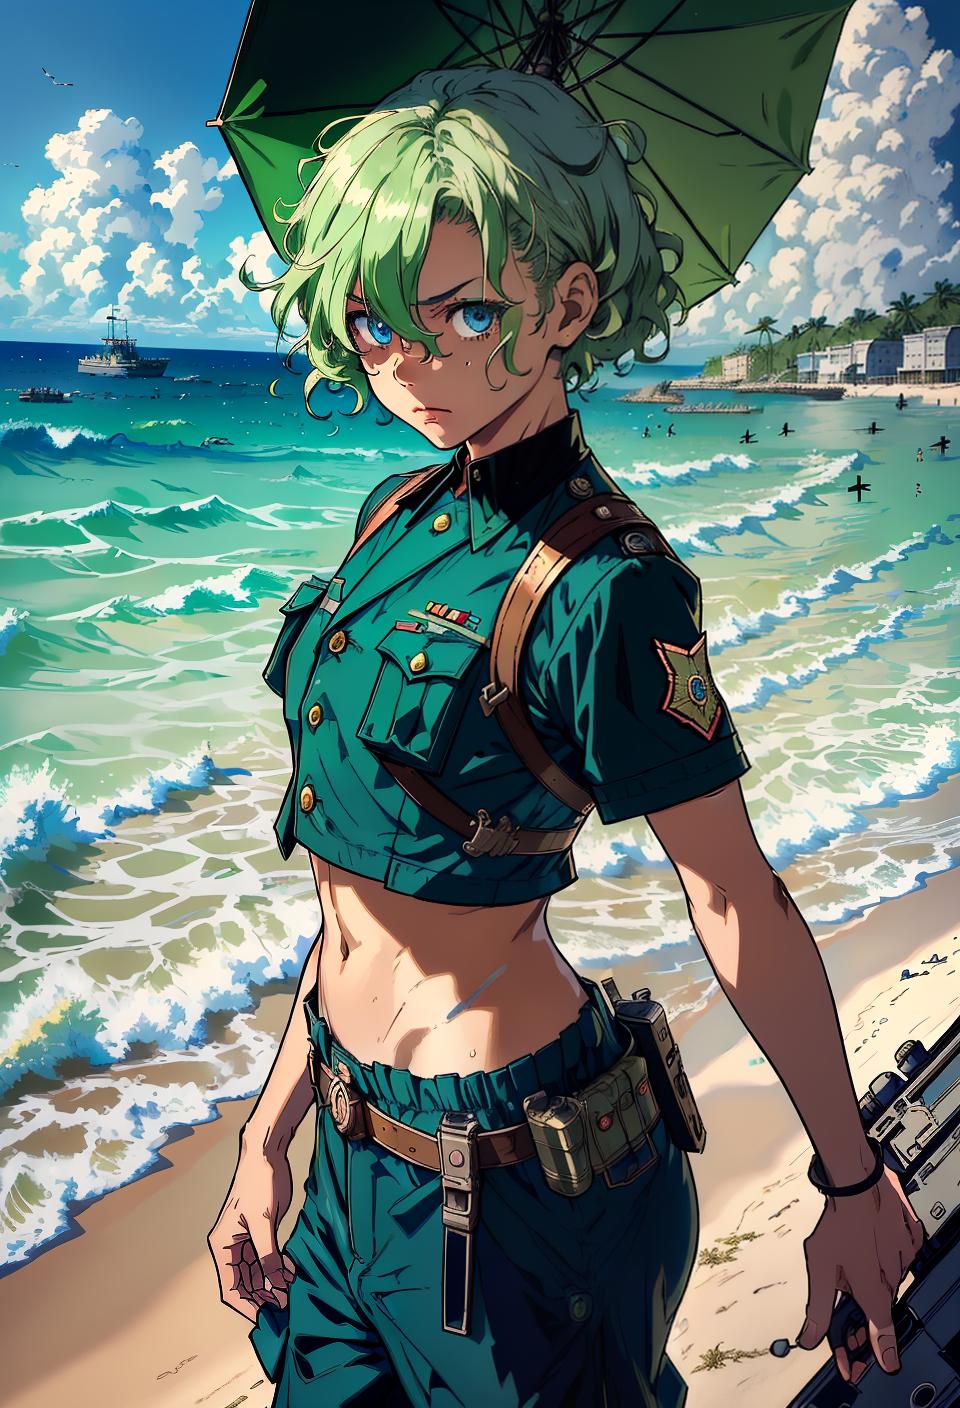  ((trending, highres, masterpiece, cinematic shot)), 1boy, young, female World War II outfit, beach scene, medium-length curly light green hair, hair covering one eye,  blue eyes, heroic personality, smug expression, dark skin, morbid, clever